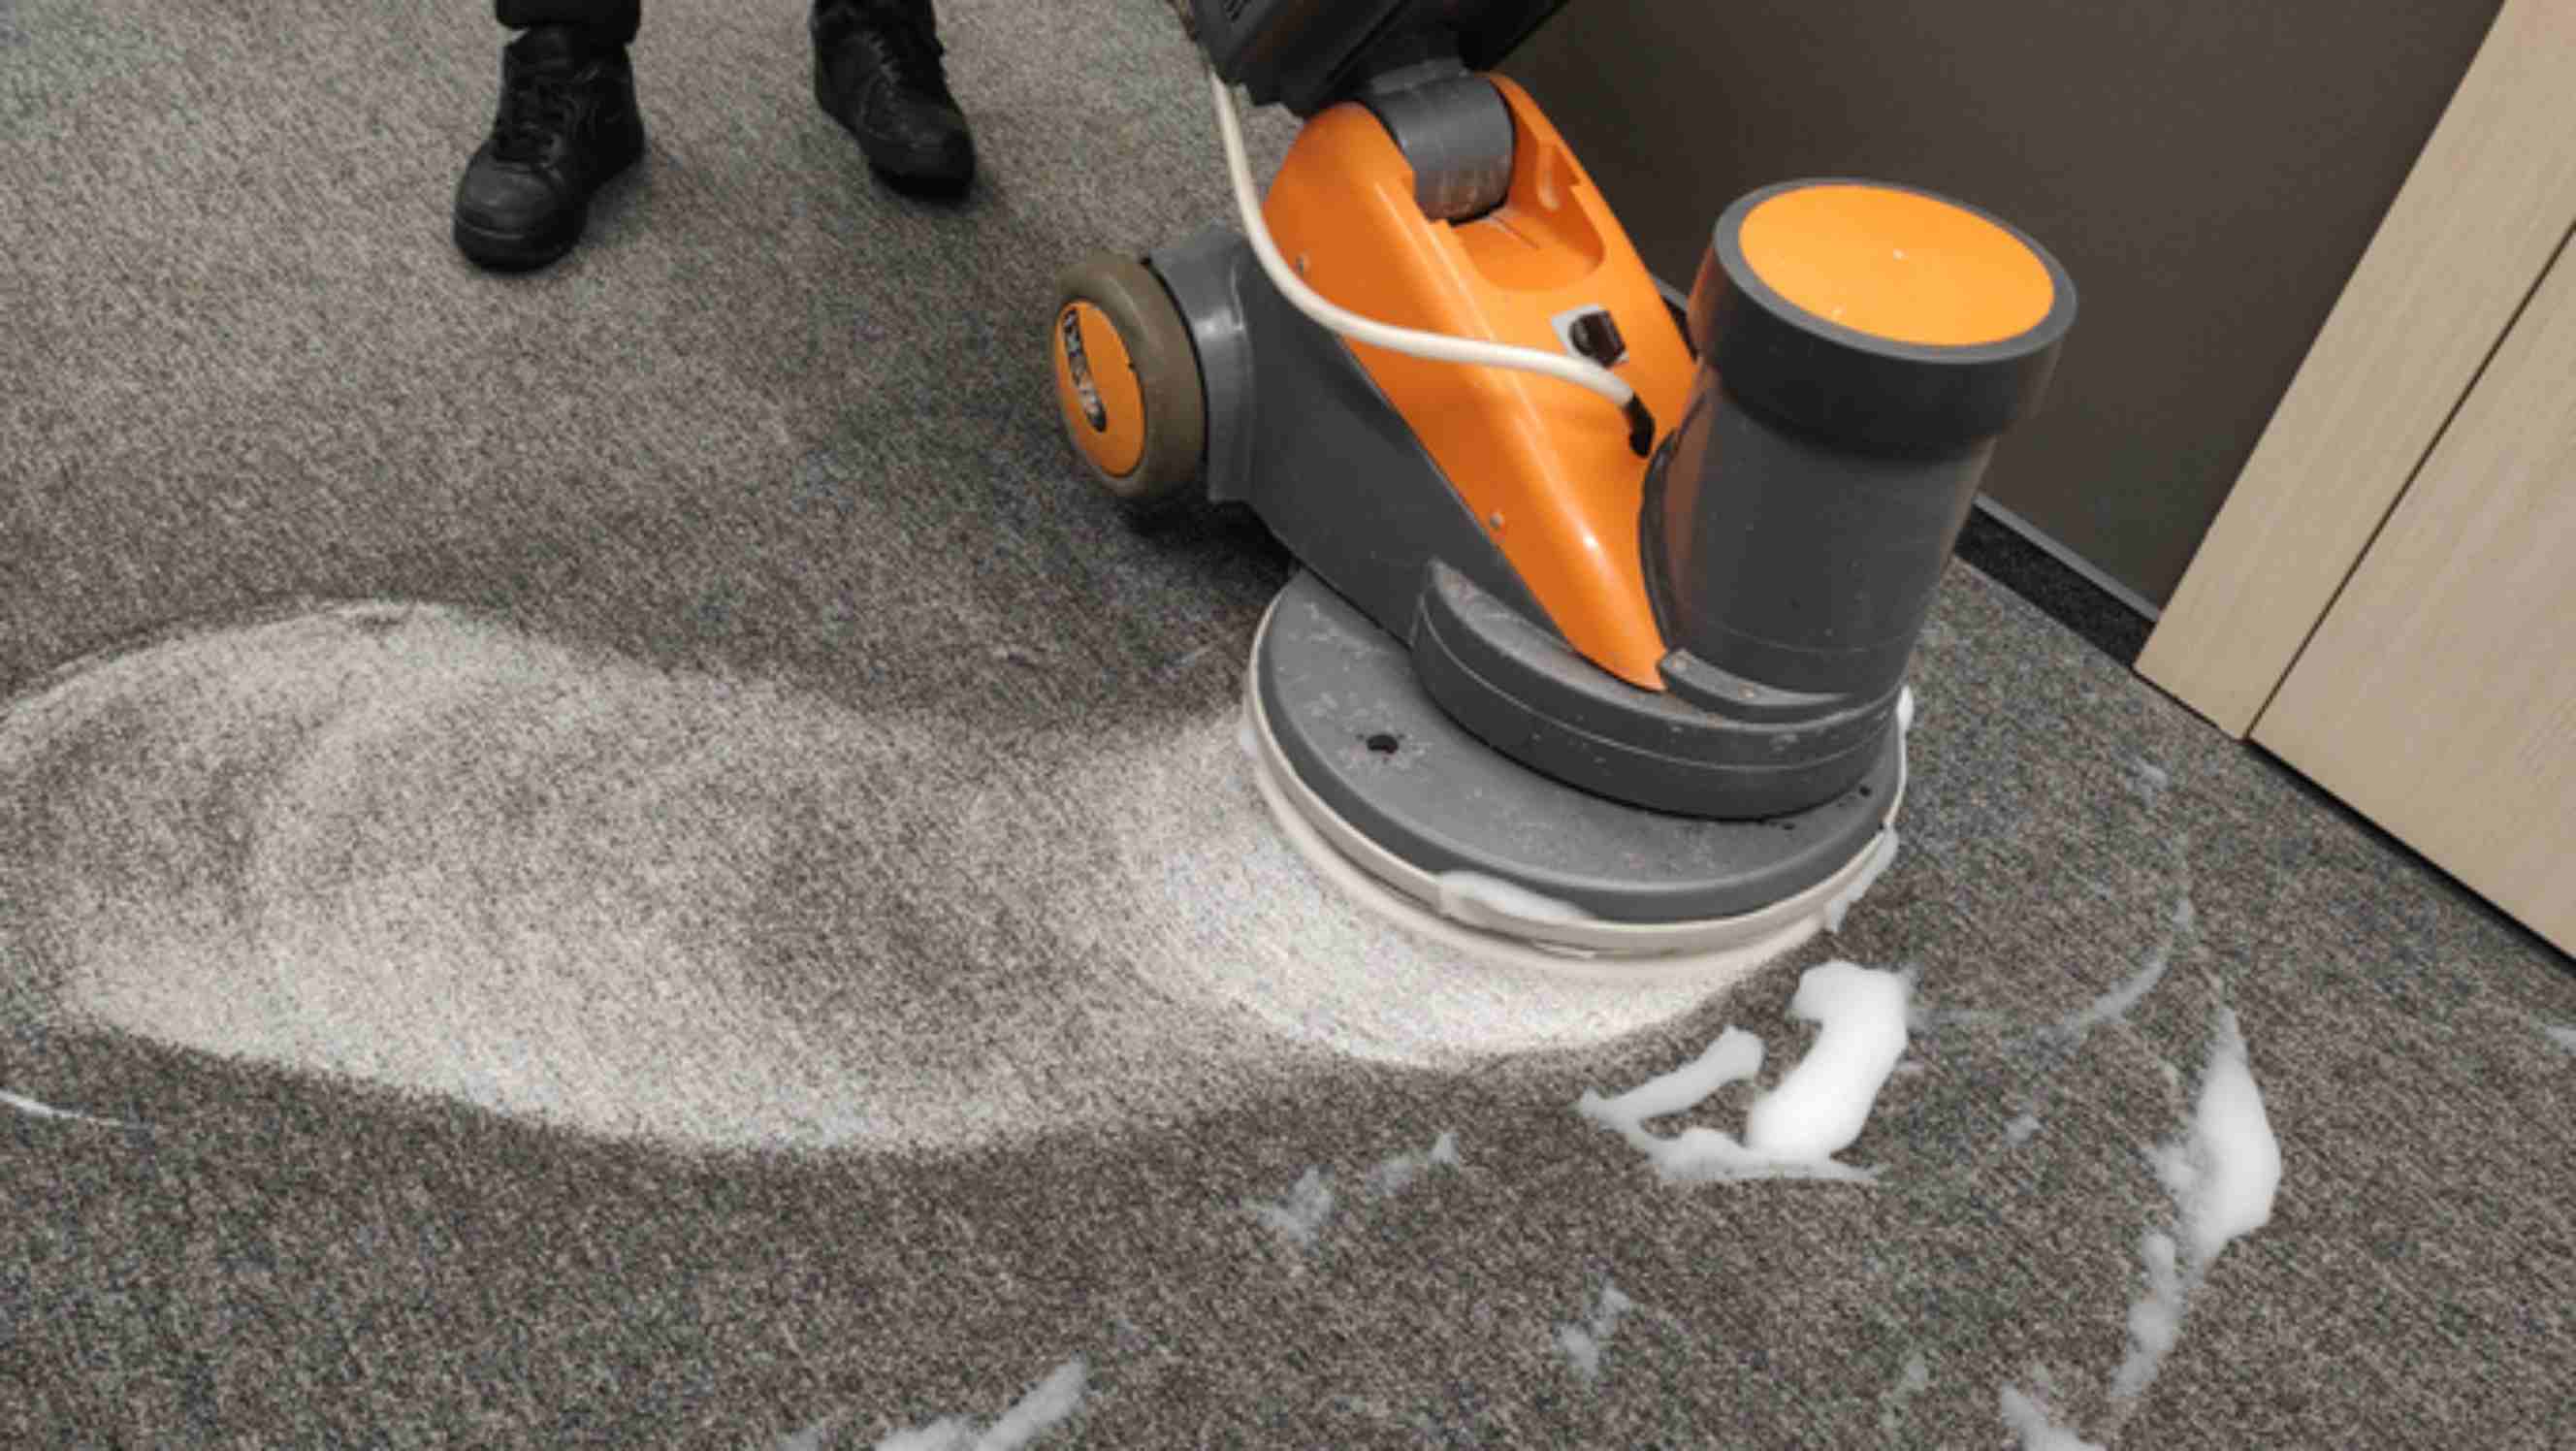 Steam cleaning carpets vs shampooing - a person cleaning a gray carpet using a carpet shampooer